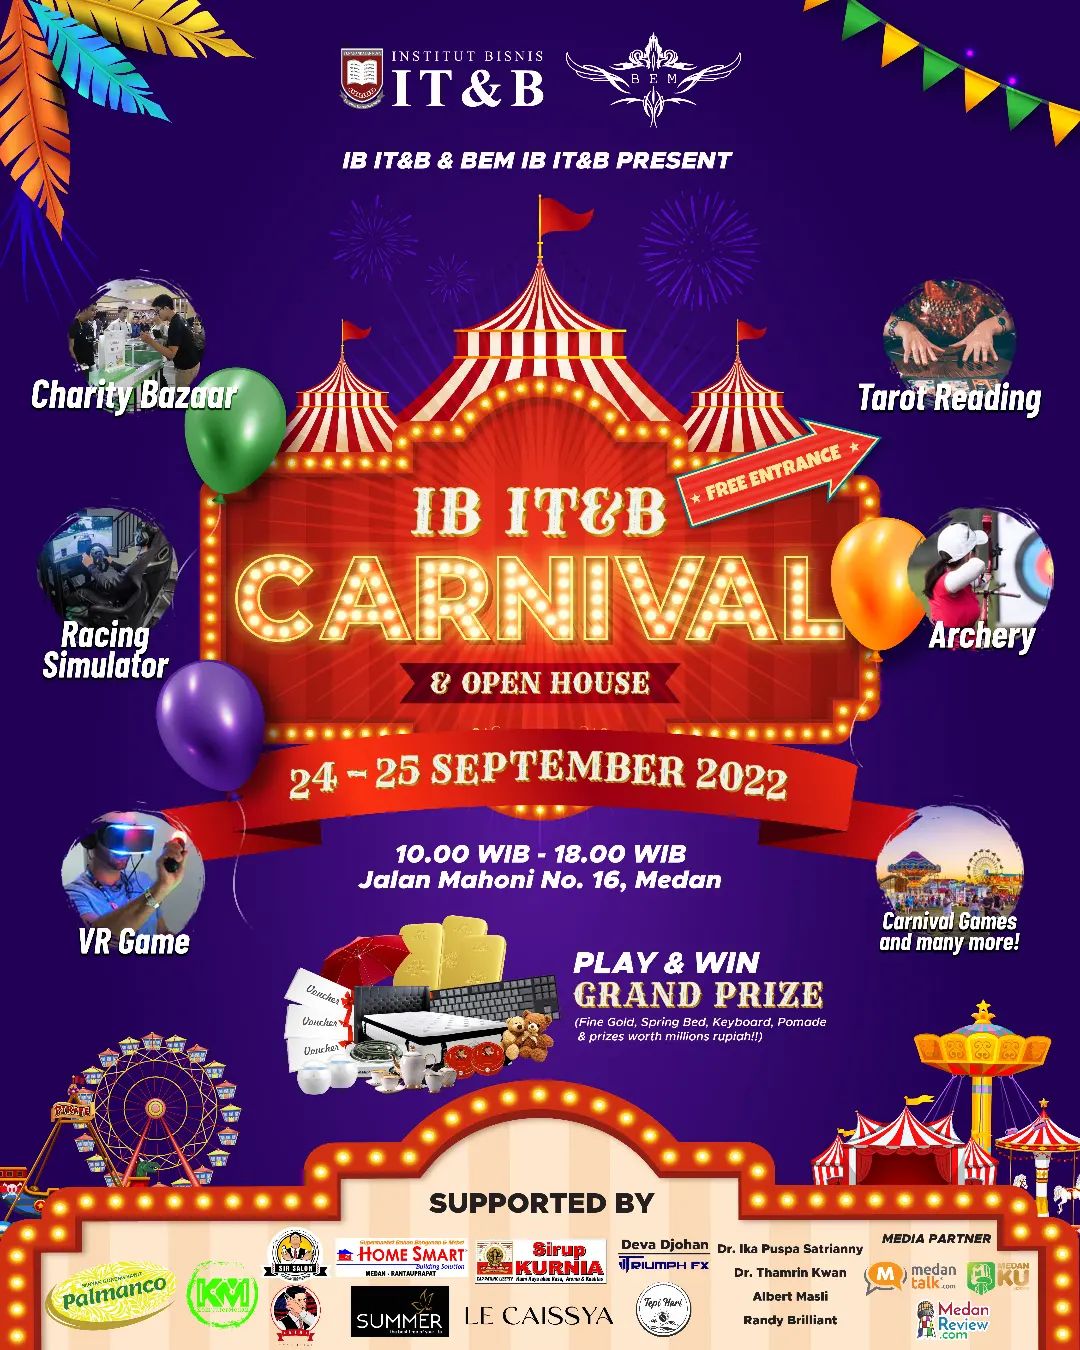 Hi dear fellas!🥰

@itnbcampus @bemibitnb proudly present the Most Awaited Carnival and Open House in Medan! 
Get ready and make sure you are here with us!🫶

_______

IB IT&B CARNIVAL & OPEN HOUSE
 : IB IT&B Campus (Jl. Mahoni No. 16, Medan)
🗓 : 24-25 September 2022 (Saturday - Sunday)
⏱ : 10.00 - 18.00 WIB
🎟 : Free Entry

 Highlights of the event are Charity Food & Drink Bazaar, VR Game, Racing Simulator, Archery, Tarot Card Reading, and many other Carnival Games waiting for you to be explored!😛

️️
Play and Win The GRAND PRIZES worth MILLIONS Rupiah 

We are looking forward to see you around!